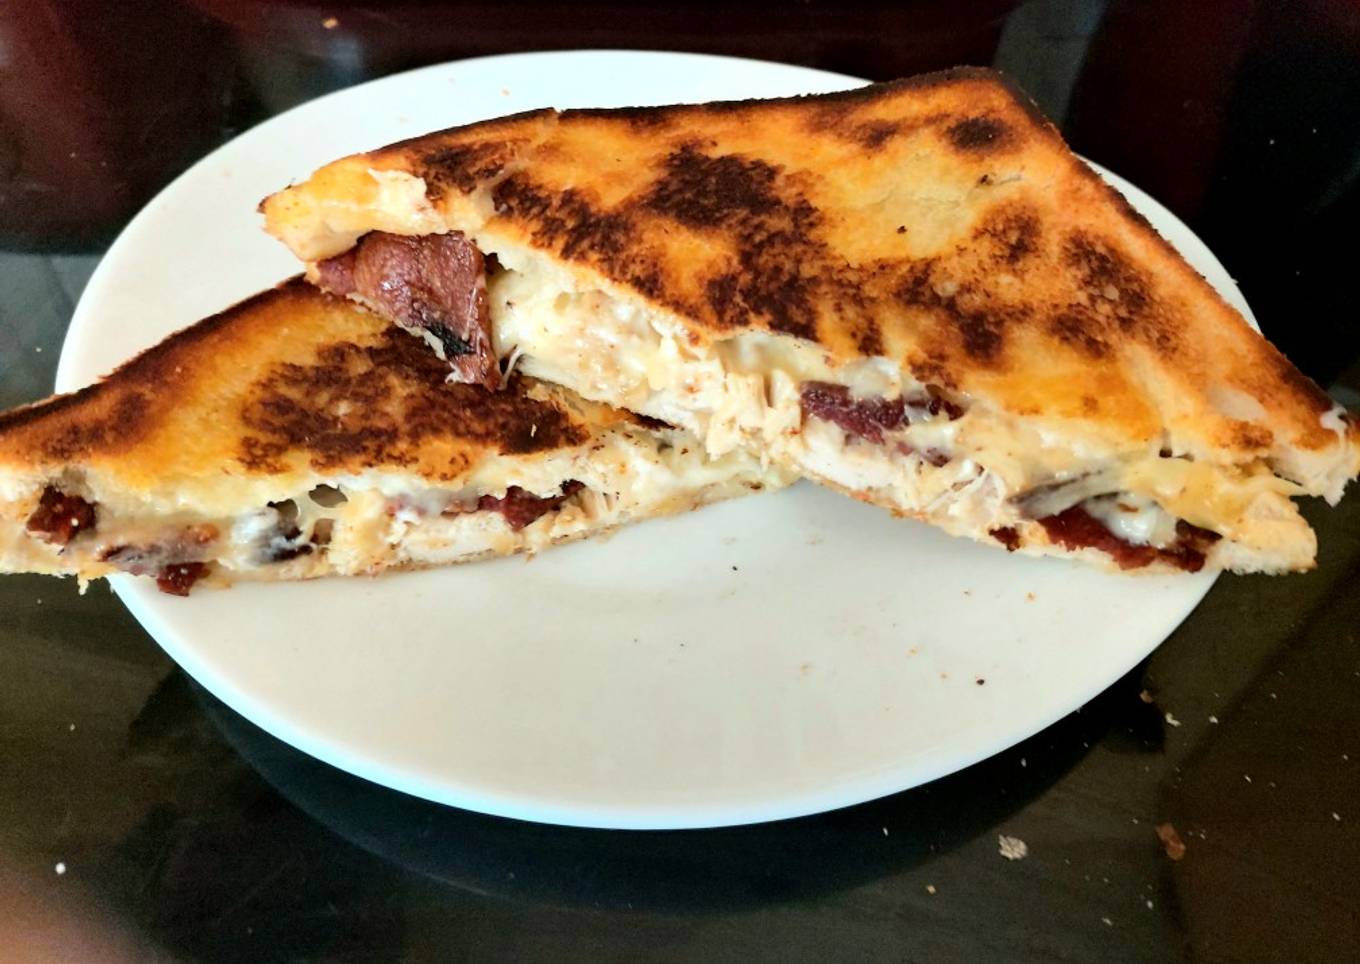 My Toasted Chicken, Streaky Bacon and cheese Grilled Sandwich